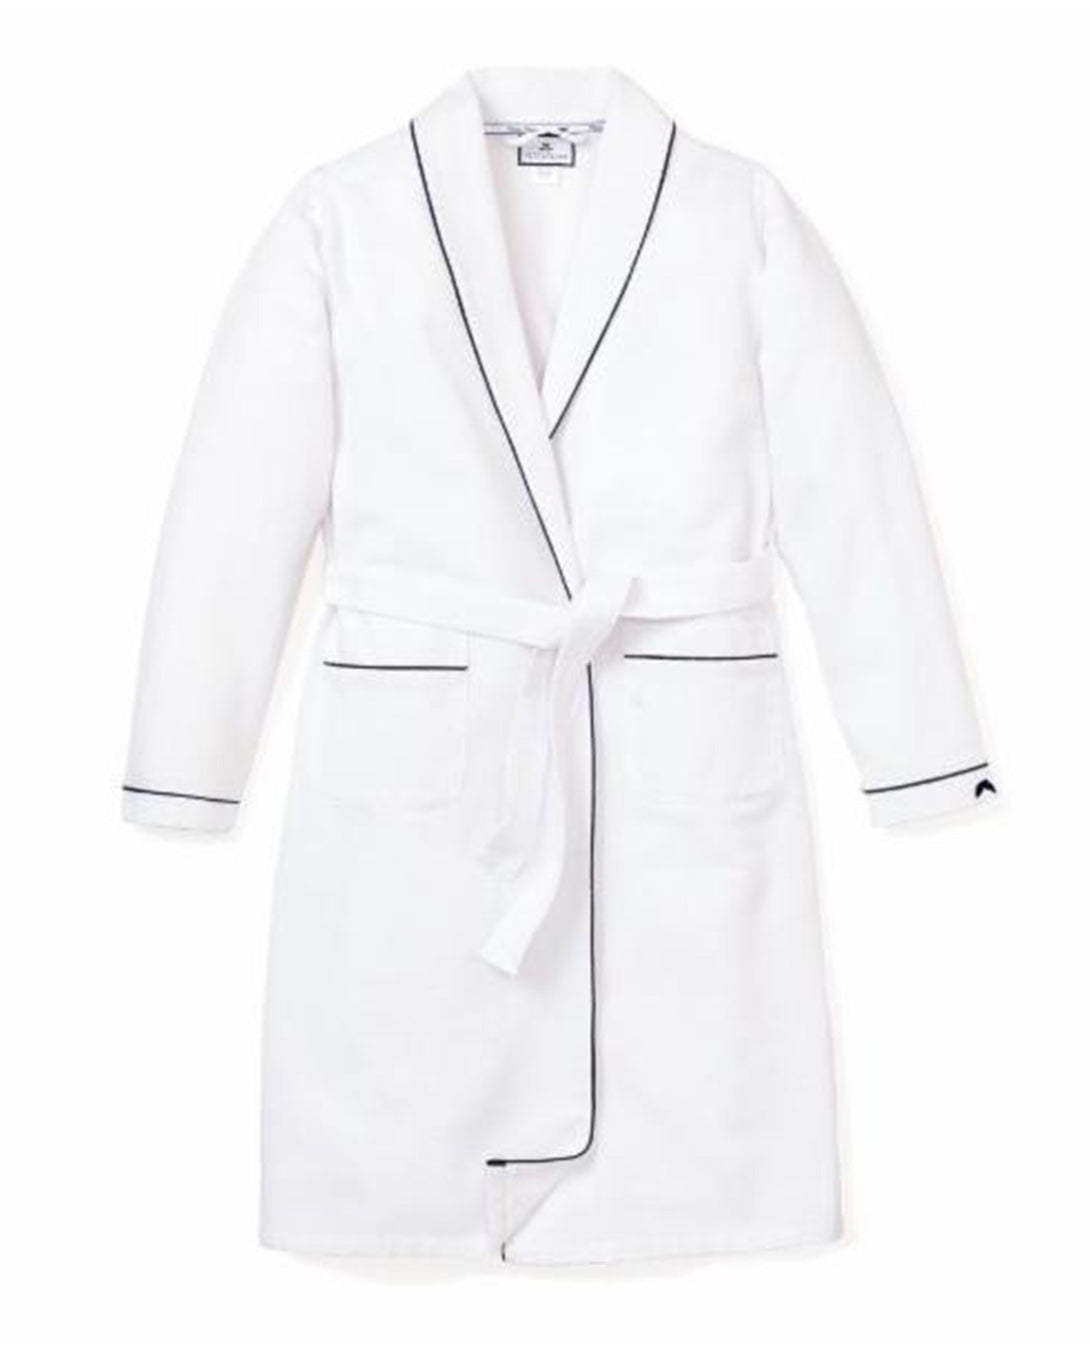 Kid's Flannel Robe in White with Navy Piping